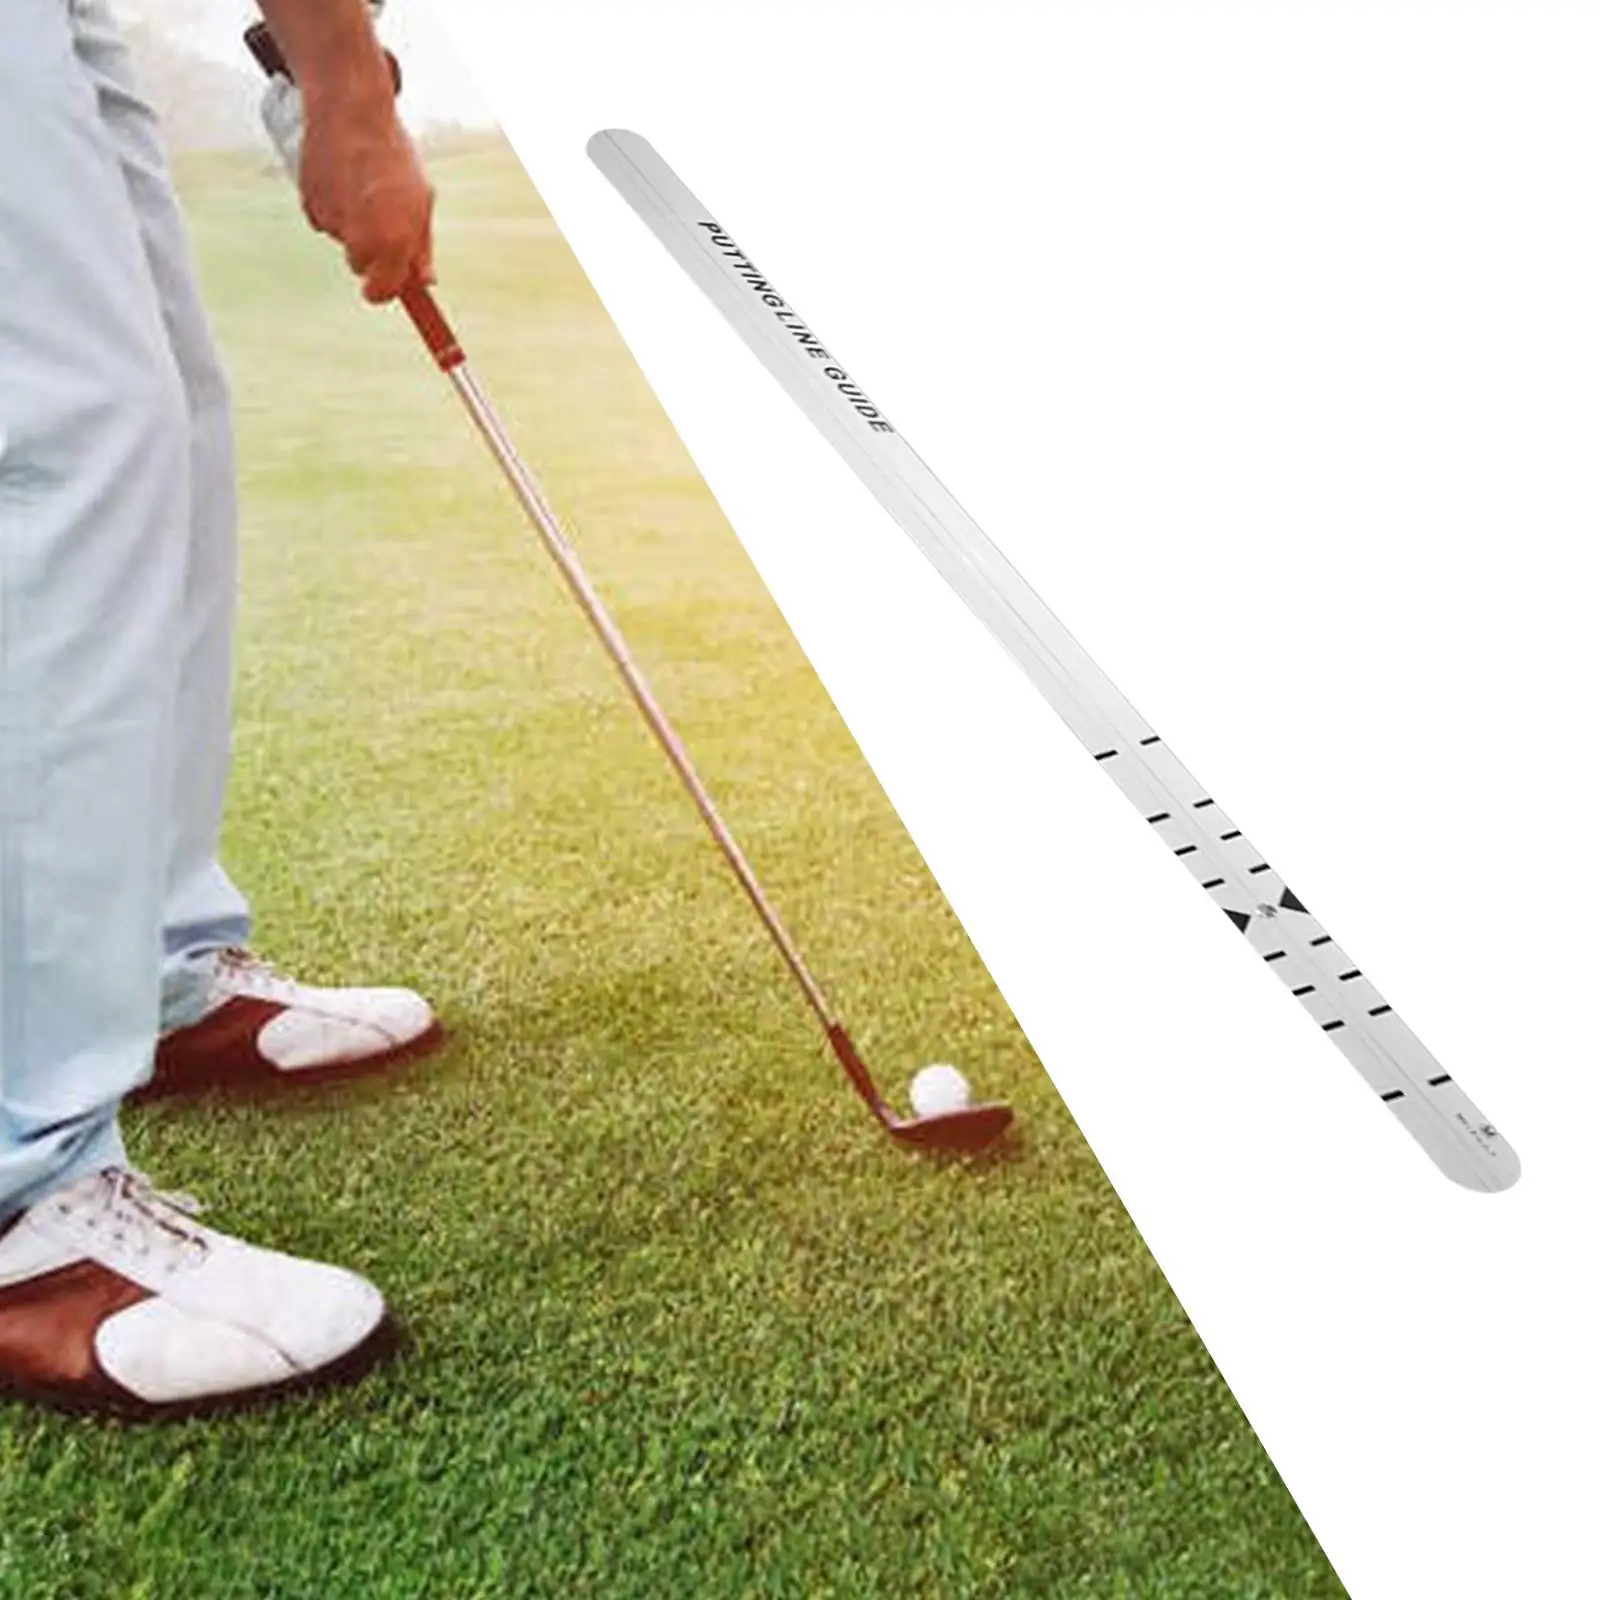 Sliding Track Aid Putter Equipment Stick Golf Putting Trainer for Outdoor